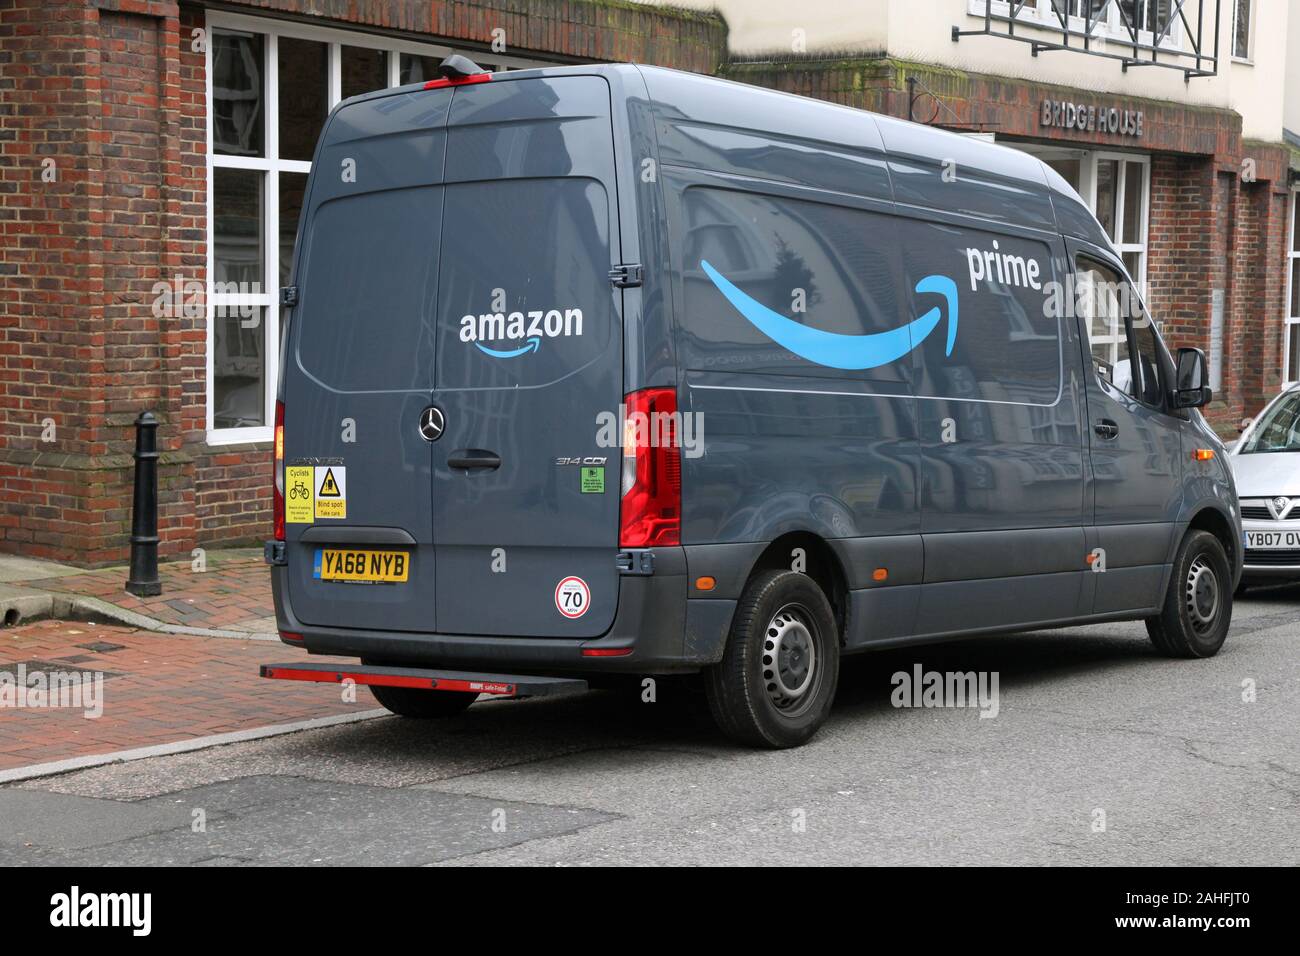 Amazon Prime Sign In High Resolution Stock Photography and Images - Alamy